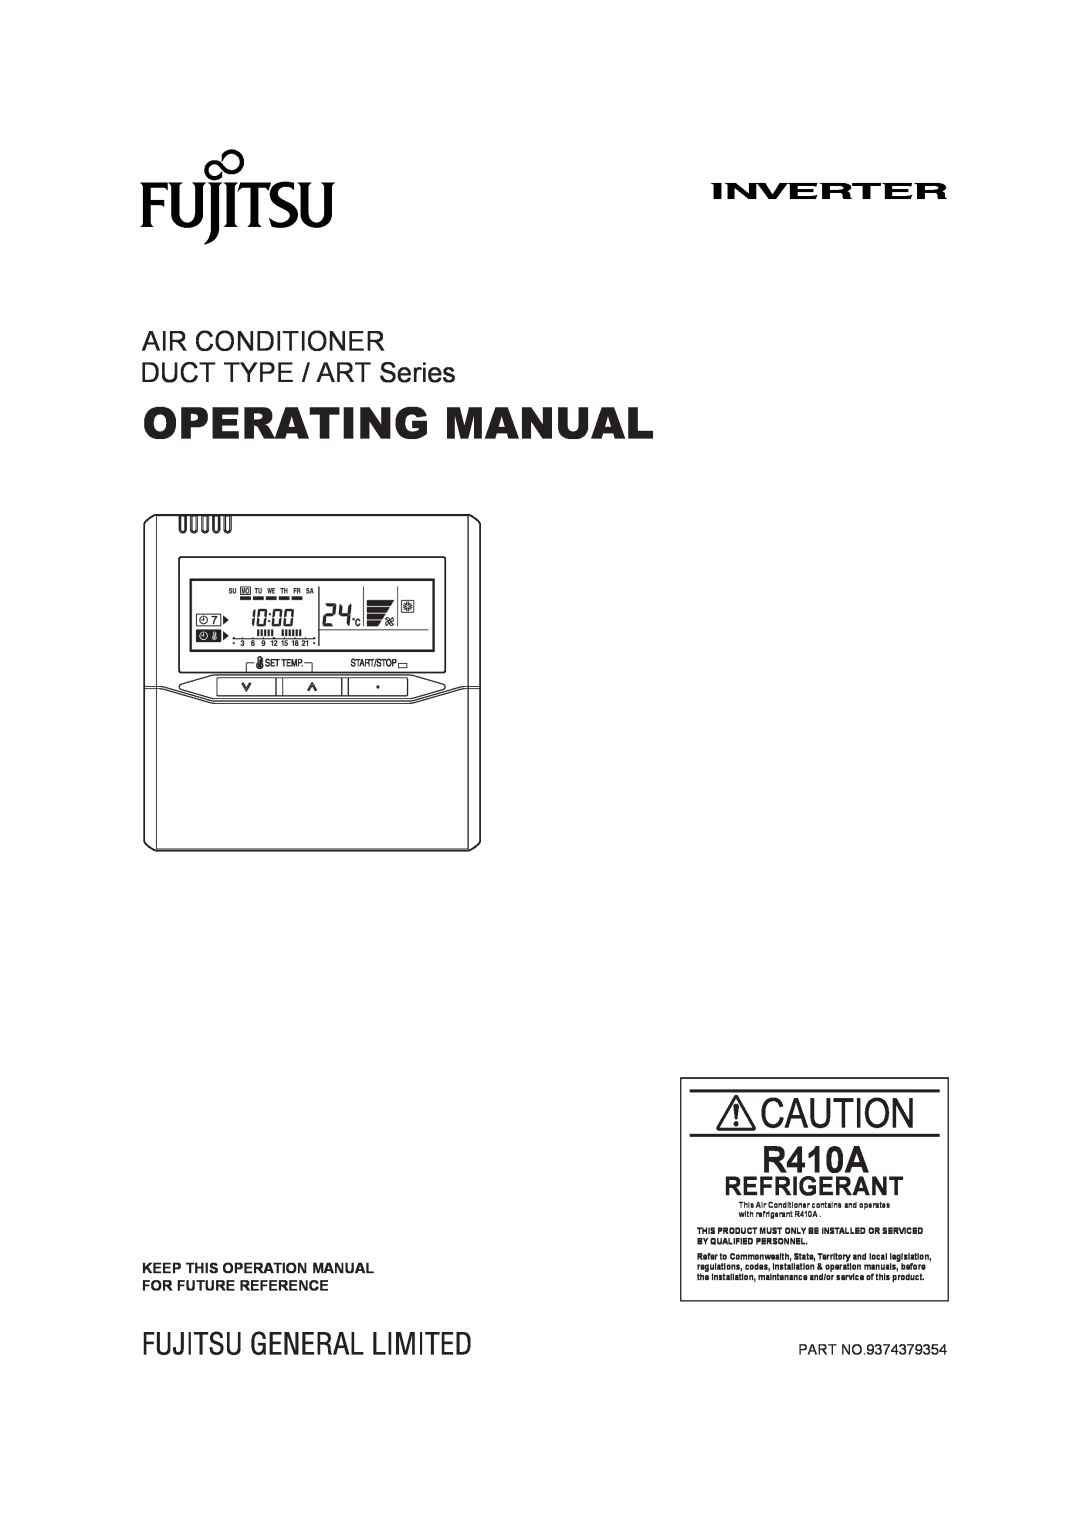 Fujitsu R410A operation manual Operating Manual, AIR CONDITIONER DUCT TYPE / ART Series, Refrigerant, PART NO.9374379354 